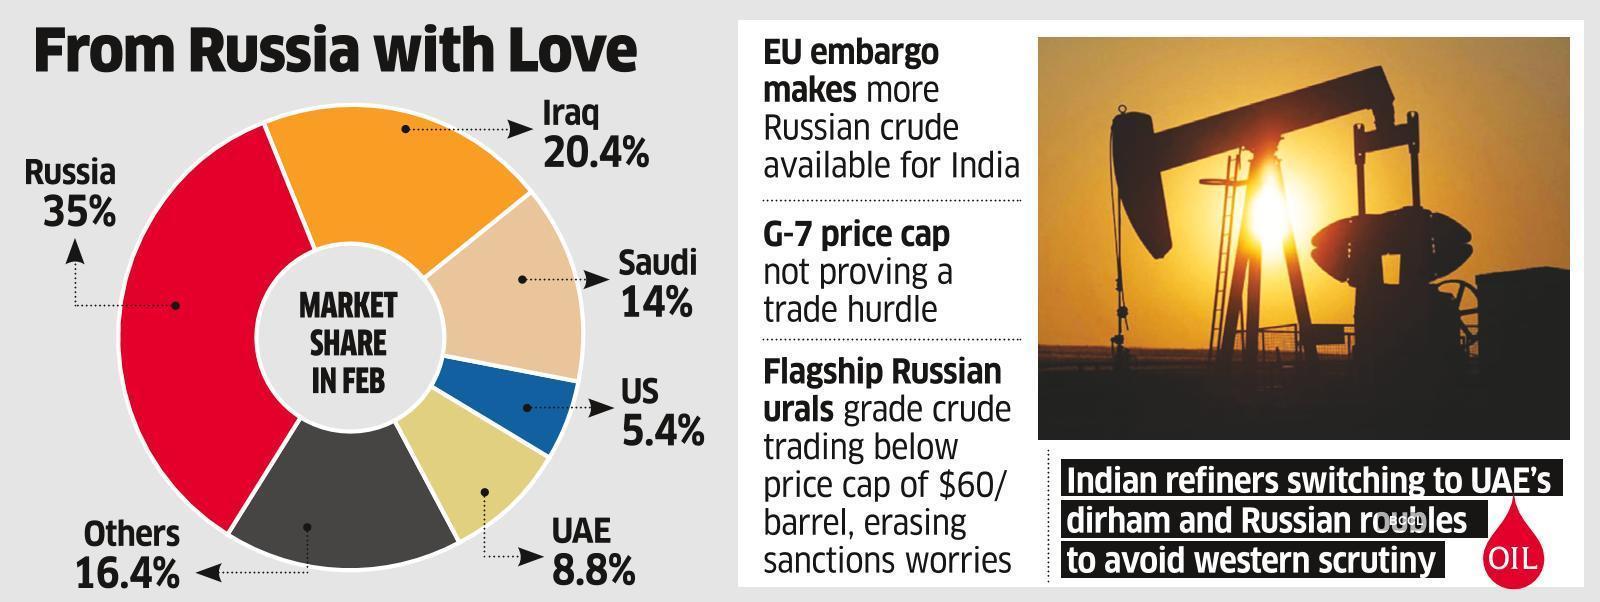 Russian crude imports in February up 28% over January - The Economic Times